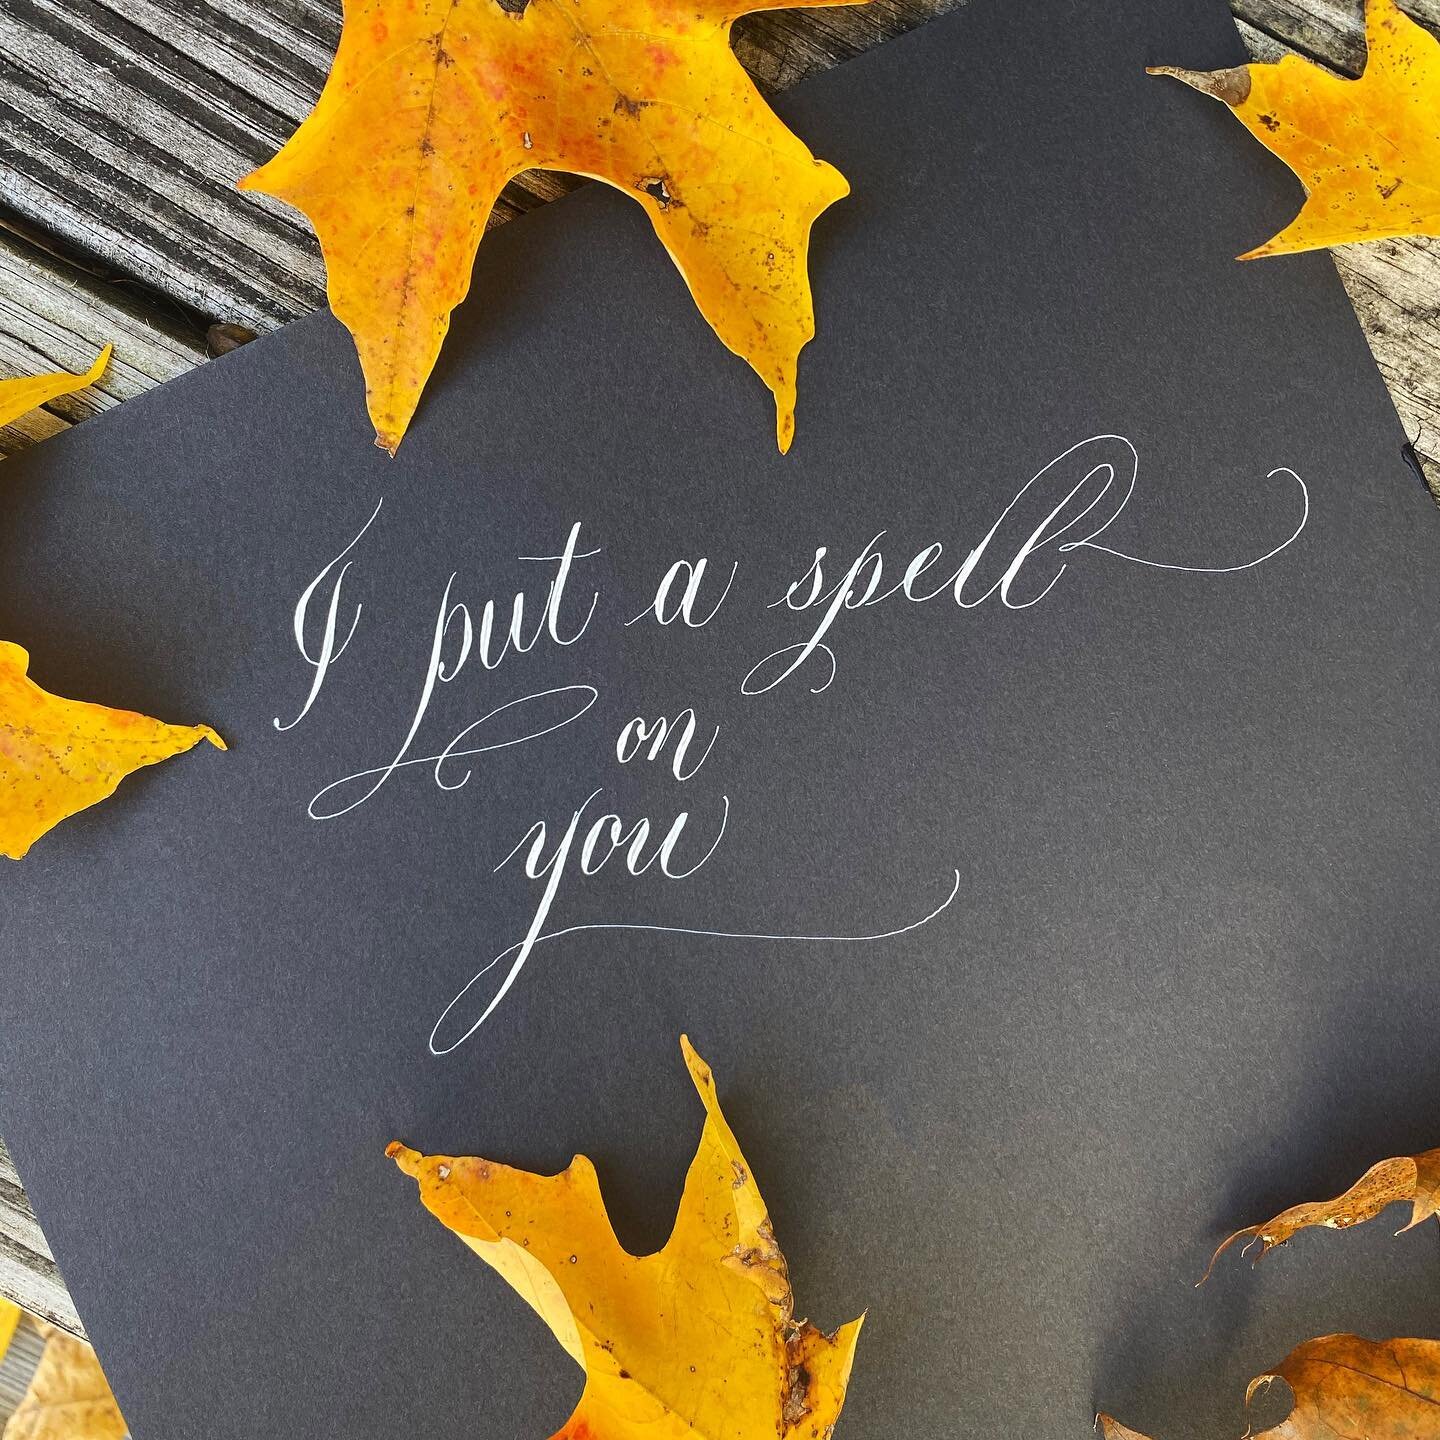 And now you&rsquo;re mine 😈🧪🔮🧙🏻&zwj;♀️ Gotta get in that Halloween spirit with a little Hocus Pocus and calligraphy 💁&zwj;♀️
.
.
.
.

#copperplate #calligraphy #fall #autumn #foliage #leaves #copperplatecalligraphy #weddingcalligrapher #calligr